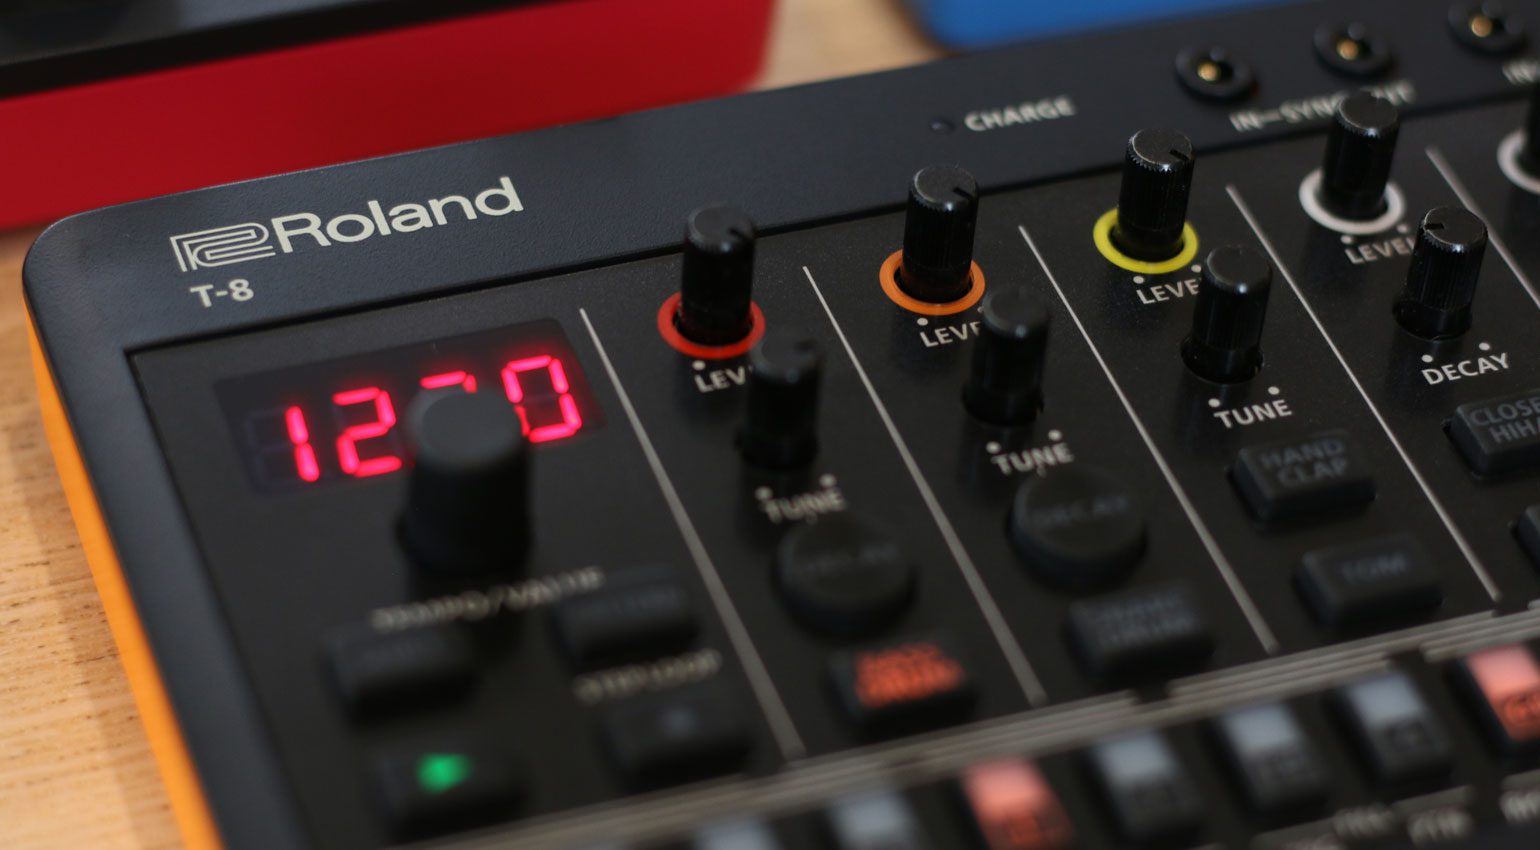 REVIEW: Roland AIRA Compact T-8, J-6 and E-4 